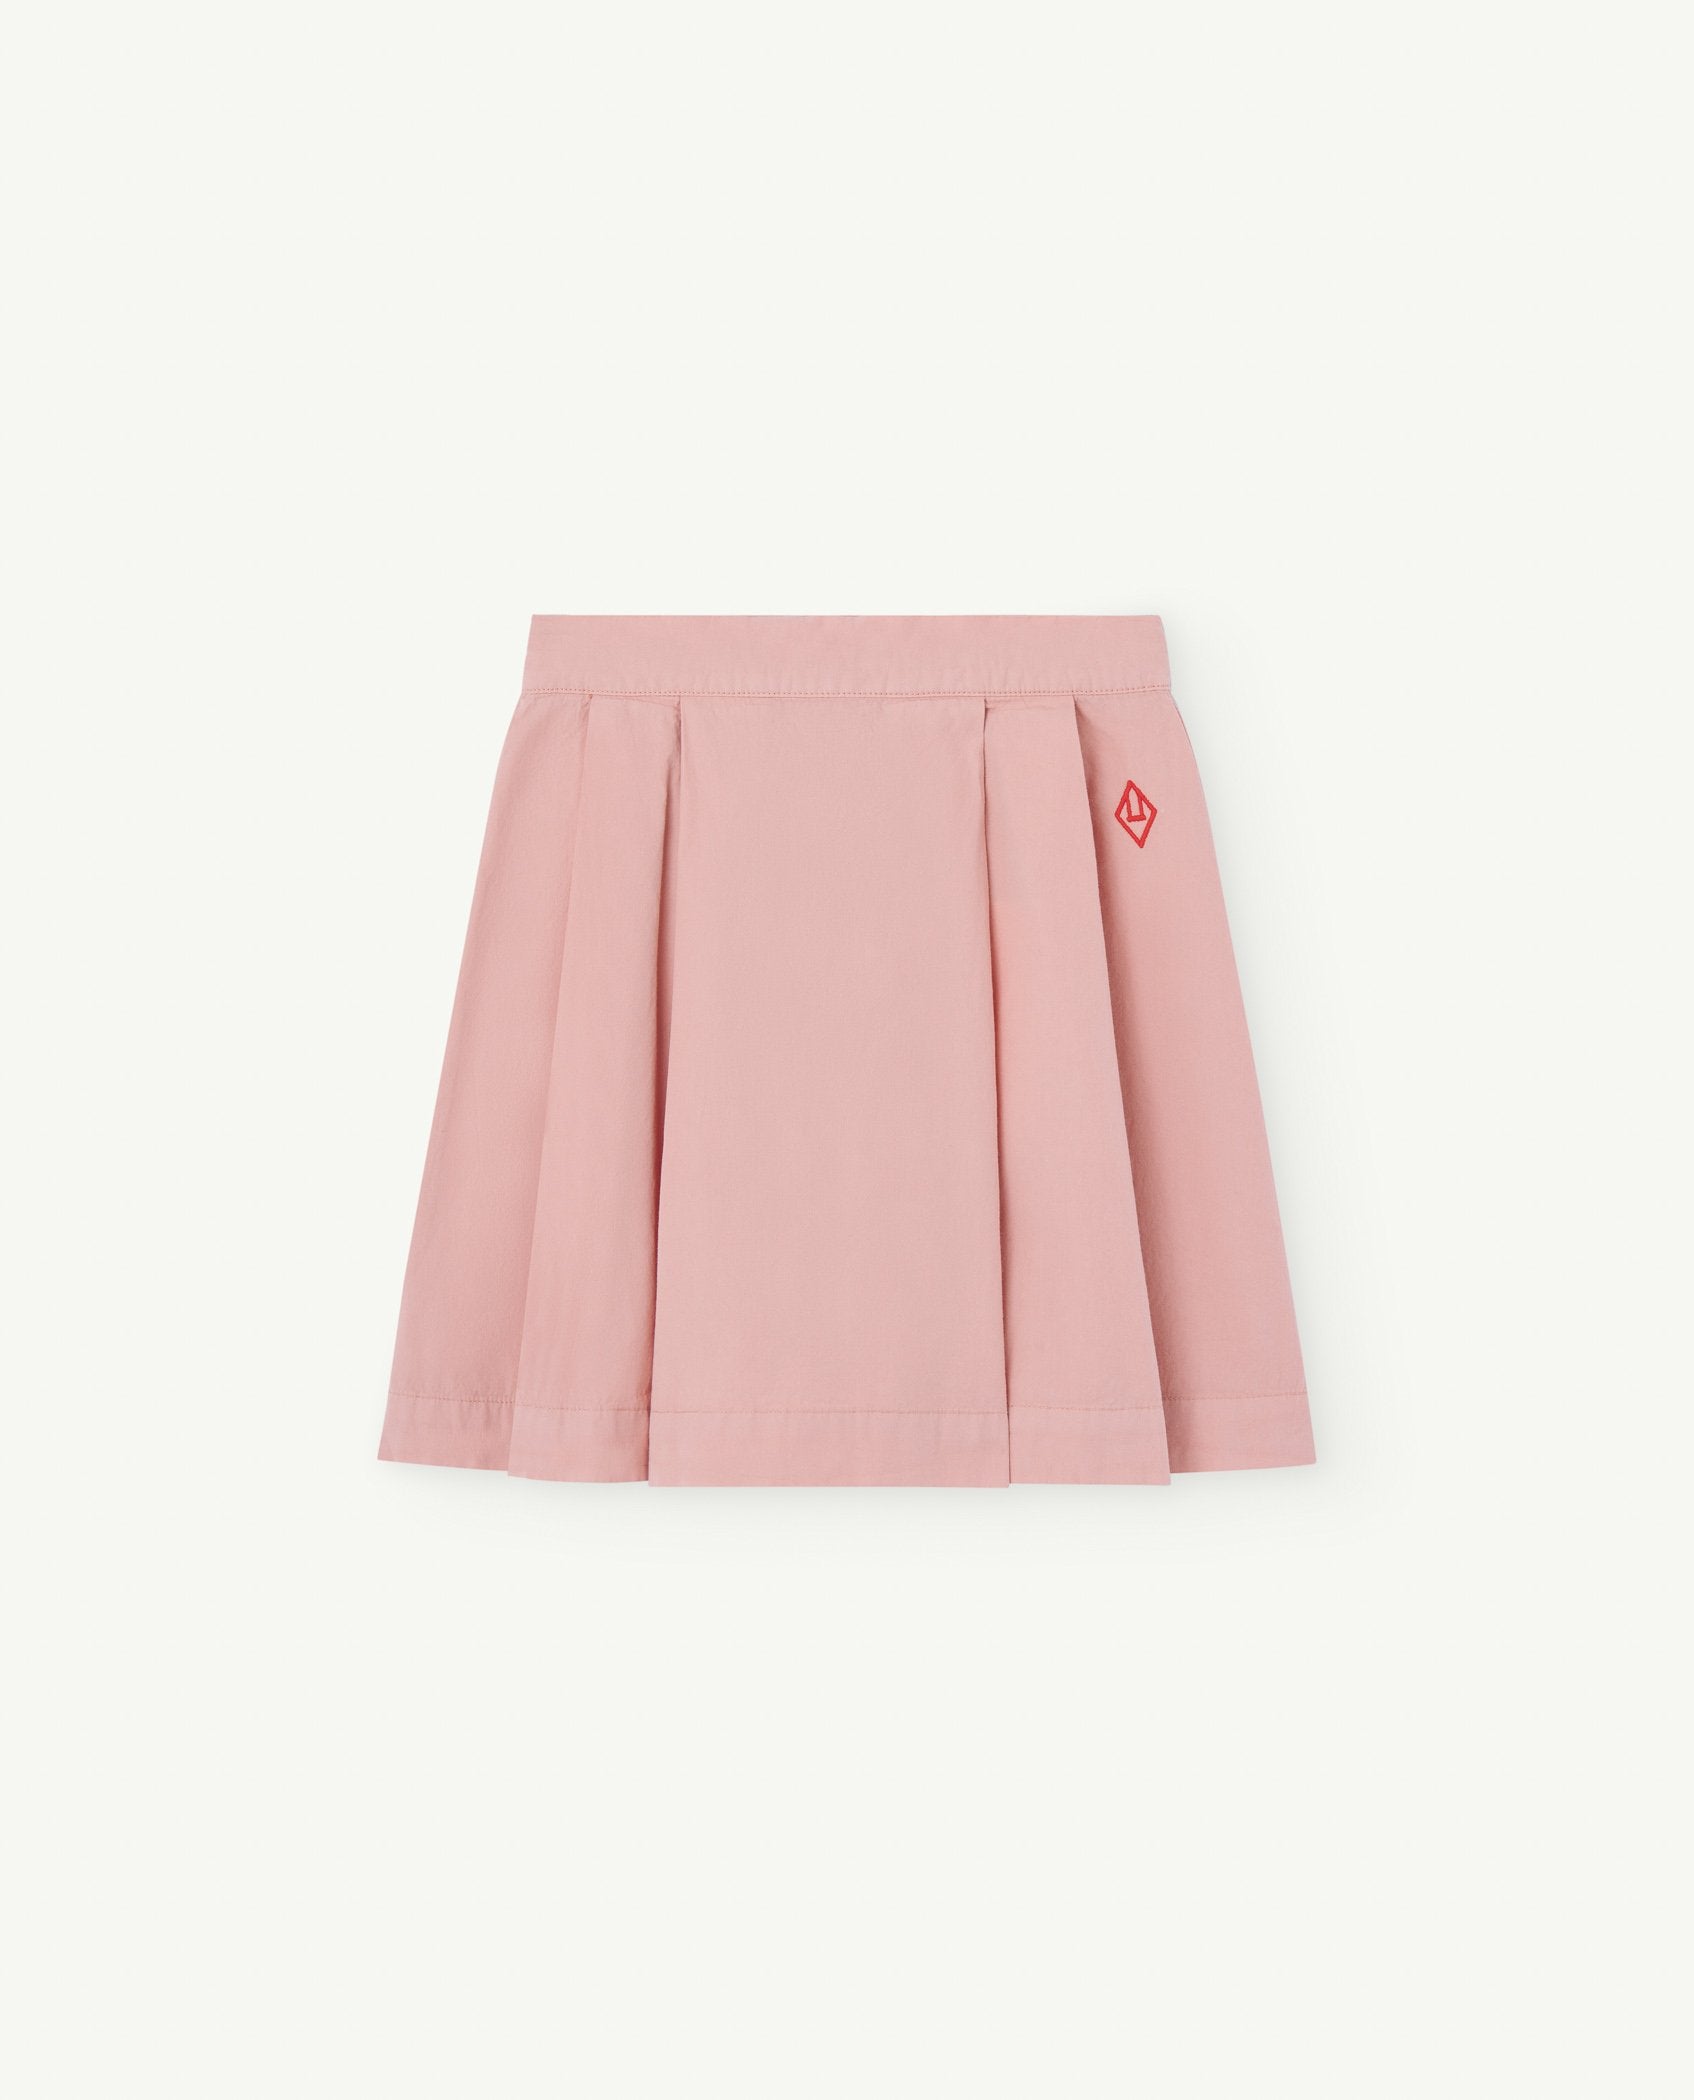 Pink Turkey Skirt PRODUCT FRONT